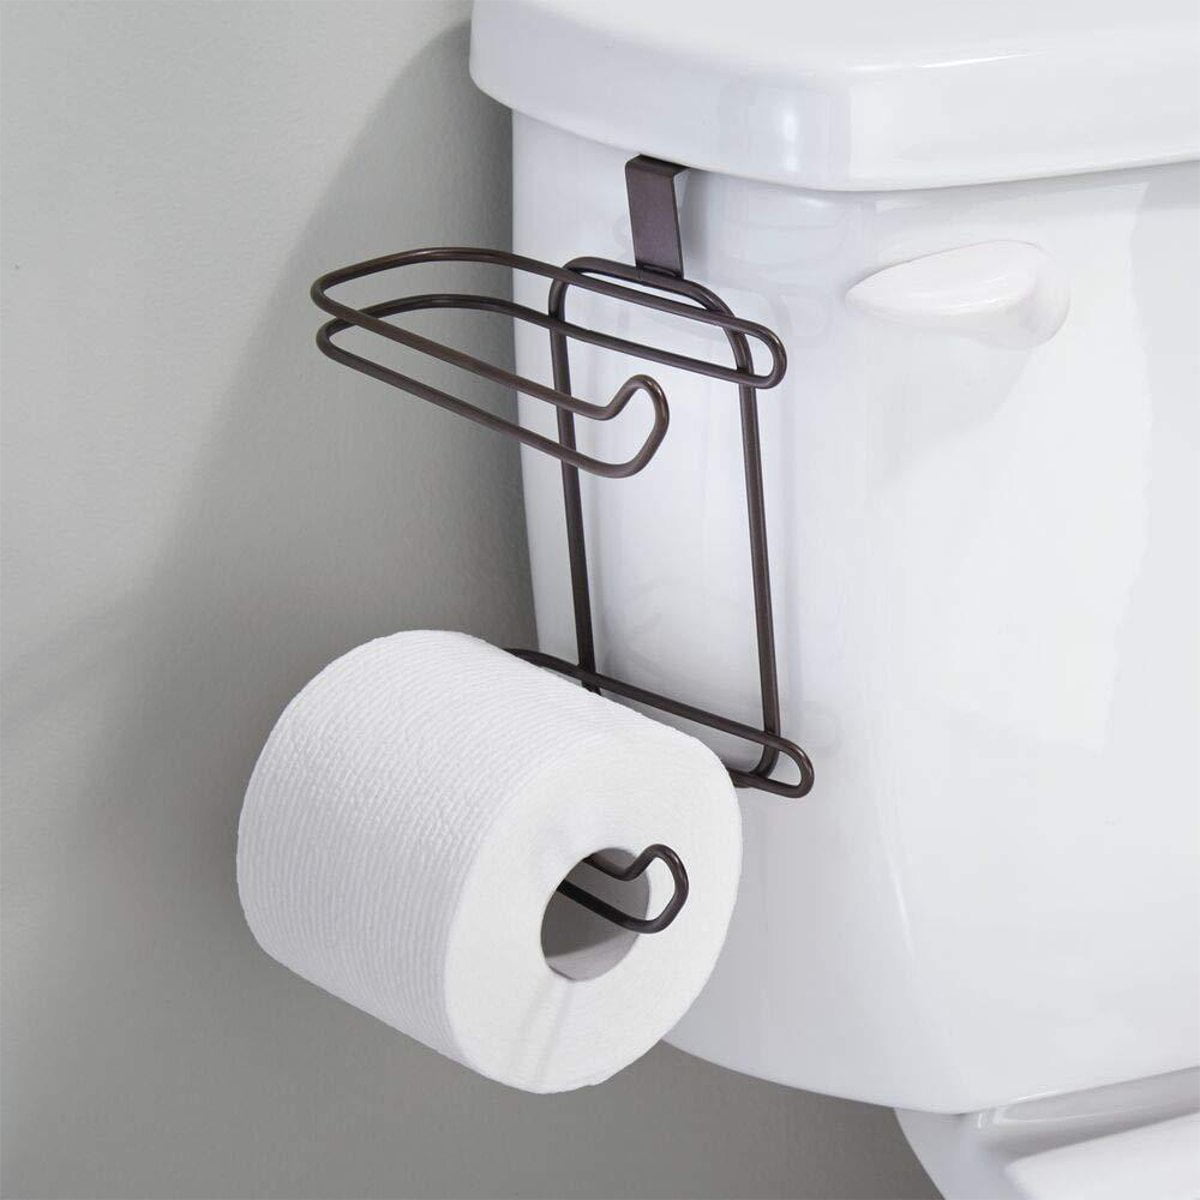 Asewon Over The Tank Toilet Paper Roll Holder Kitchen Towel Storage Organizer Hanging